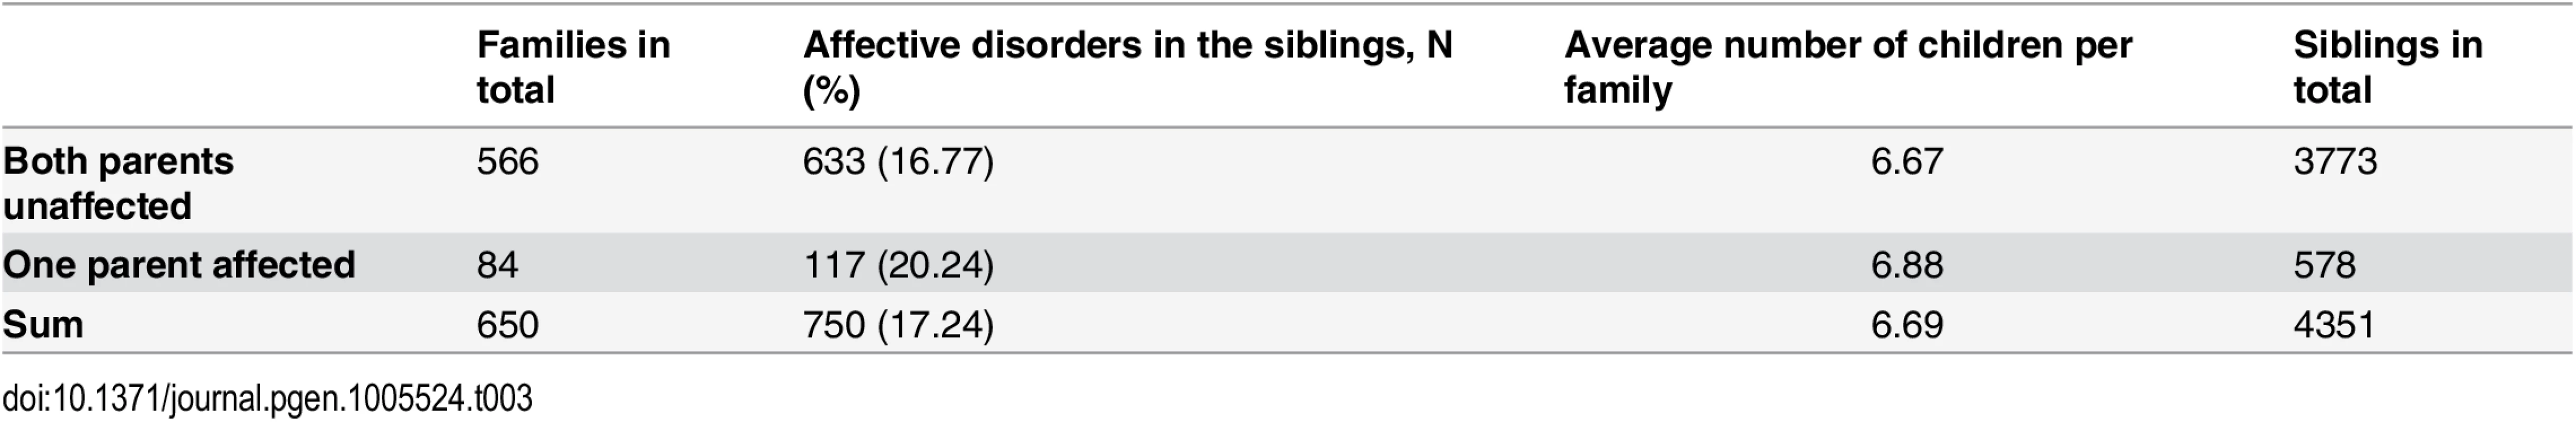 Distribution of affective disorders among the siblings of included families.